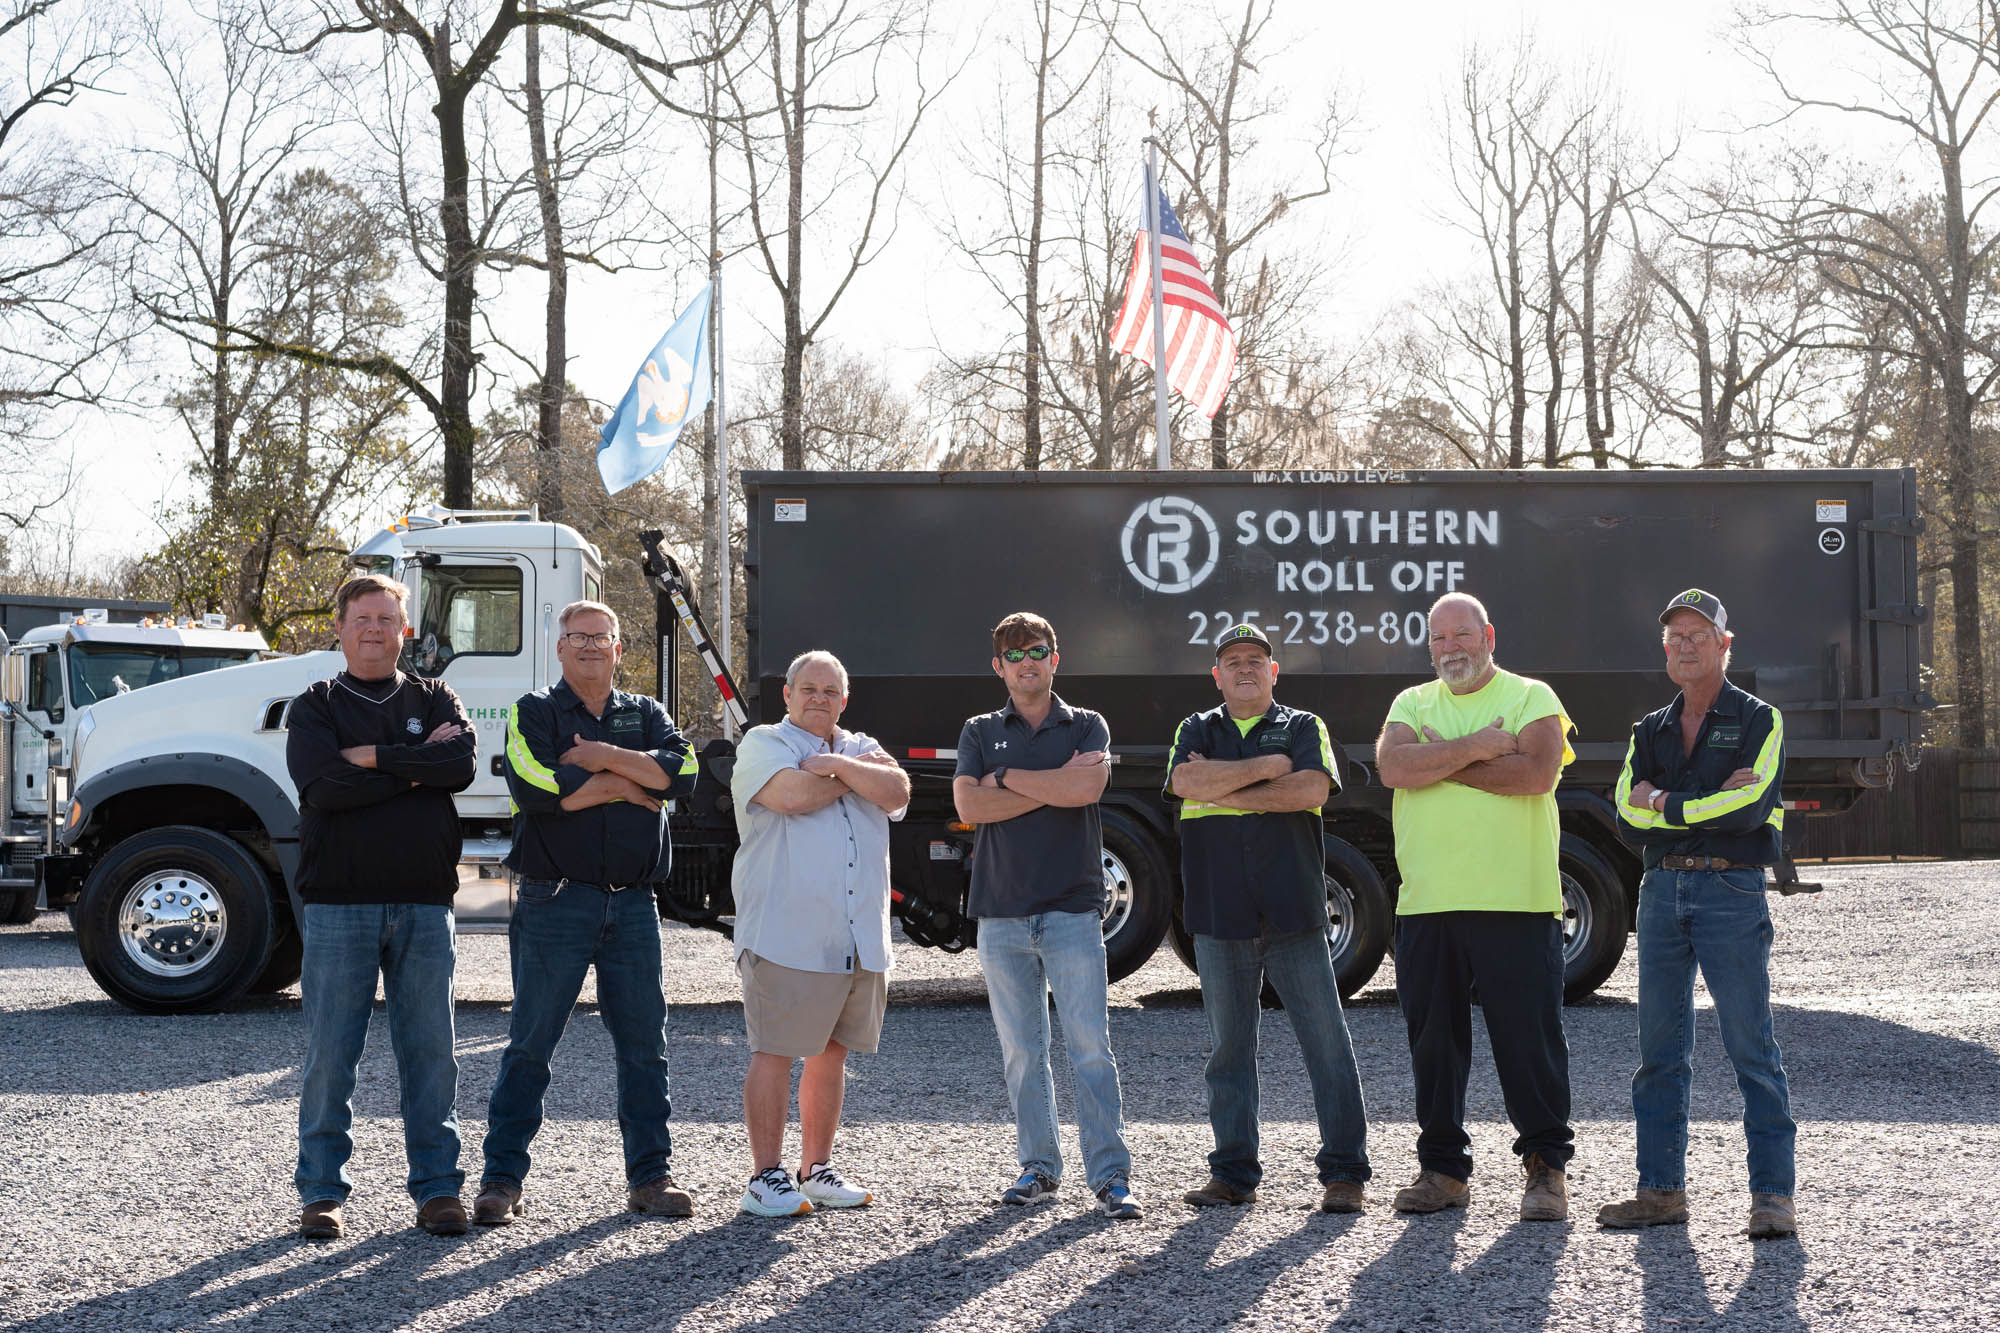 Southern Roll Off team photo with one of their trucks